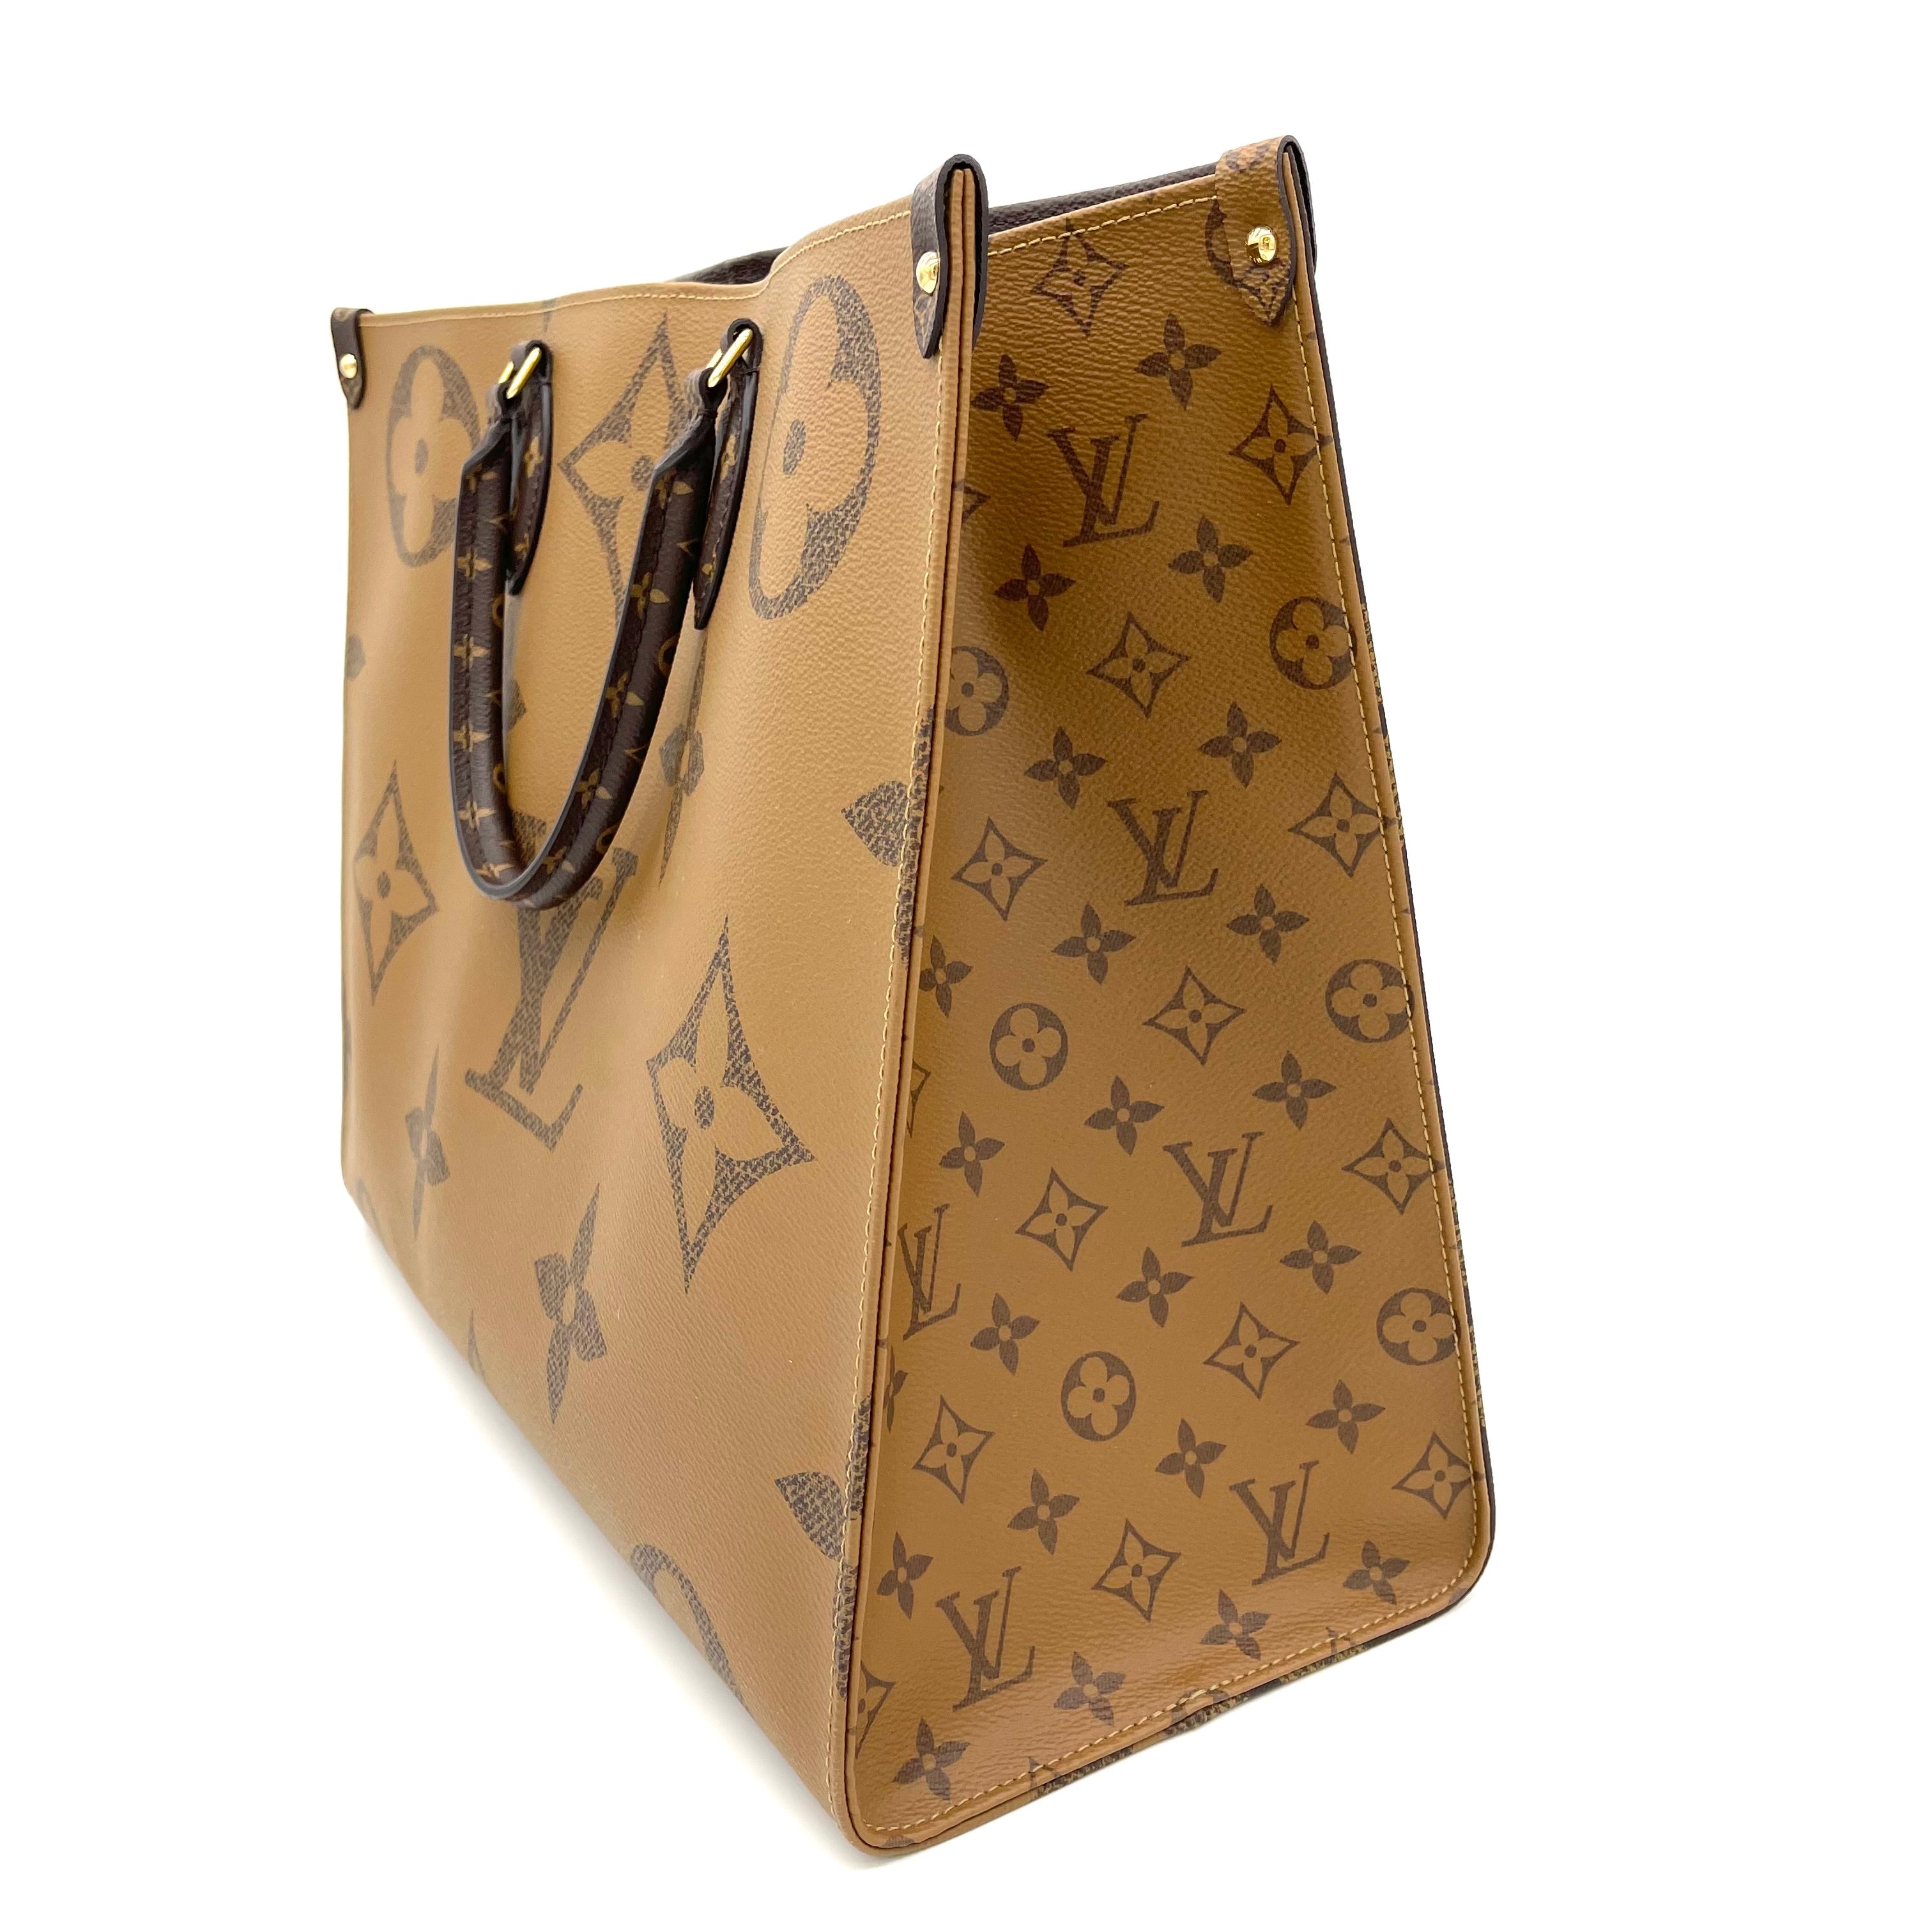 Shop Louis Vuitton Onthego Gm (ON THE GO TOTE BAG, M45320) by Mikrie